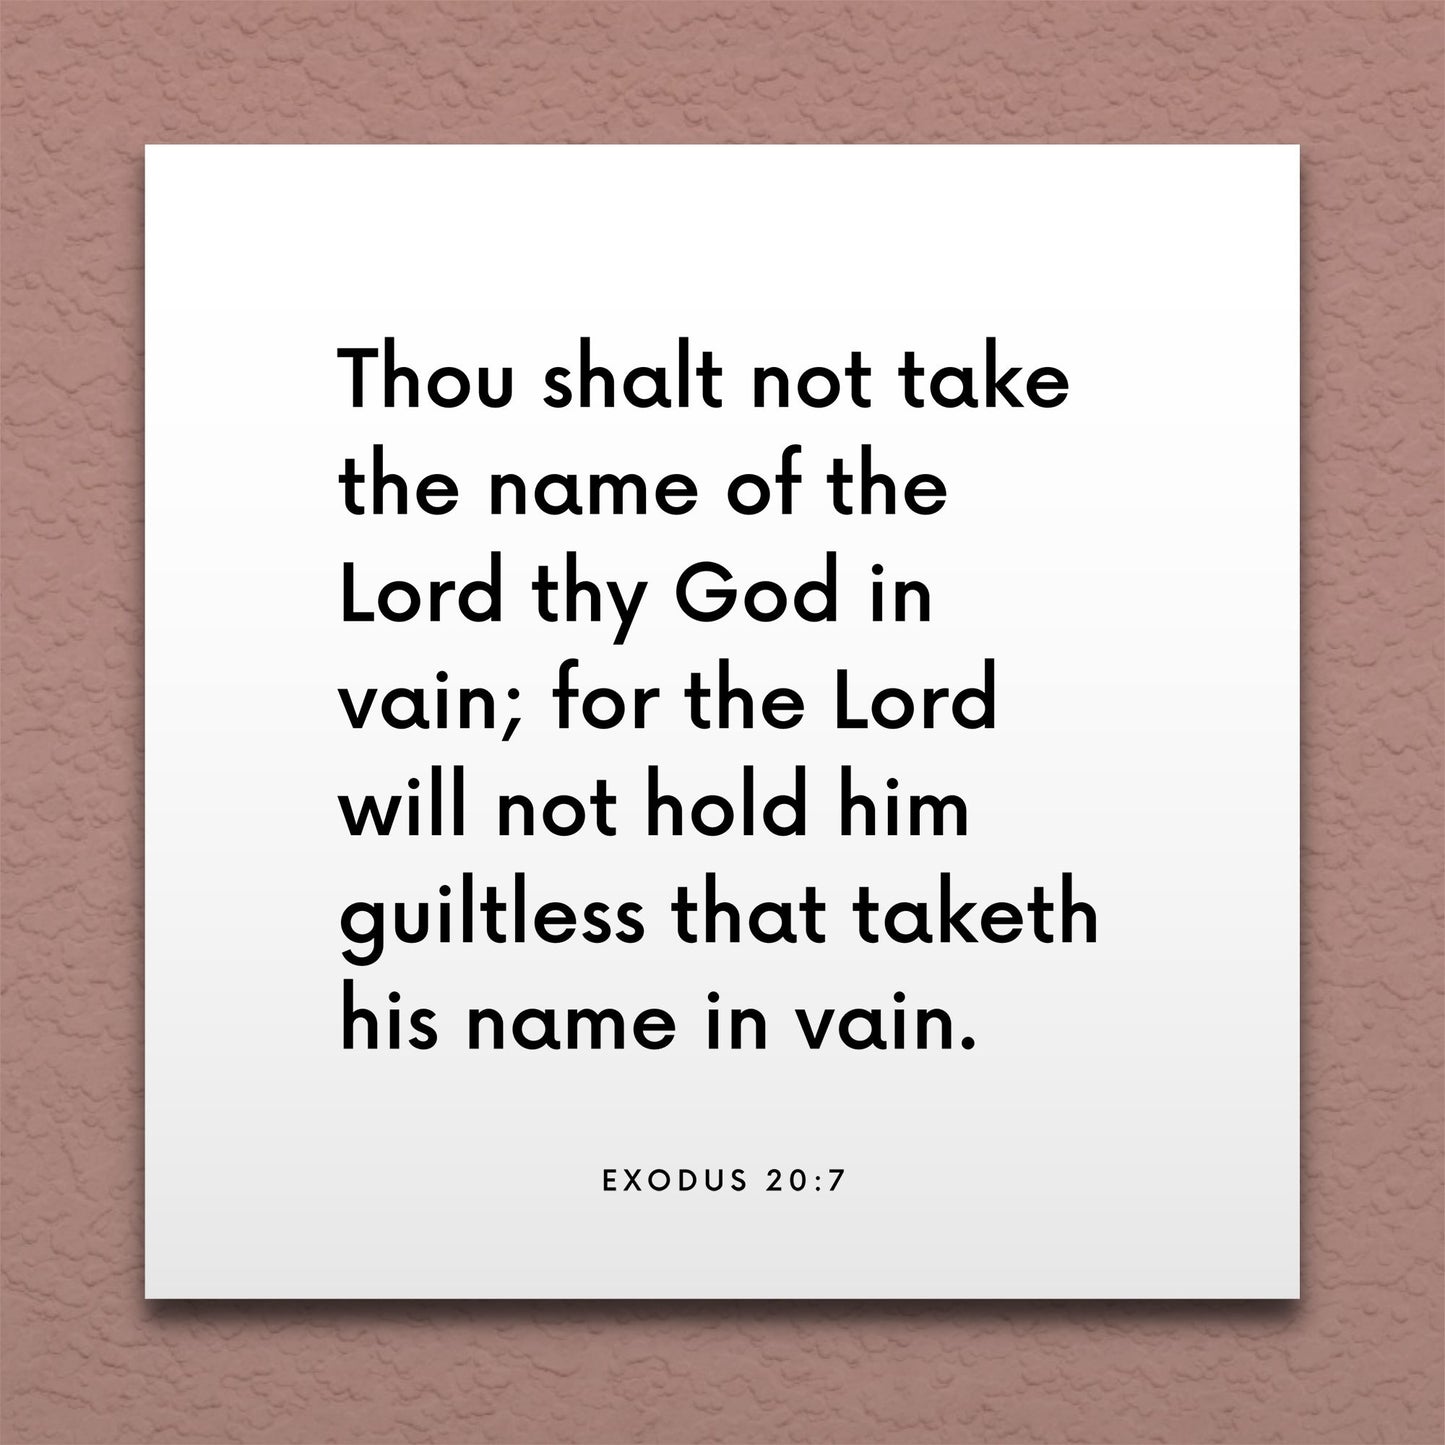 Wall-mounted scripture tile for Exodus 20:7 - "Thou shalt not take the name of the Lord thy God in vain"